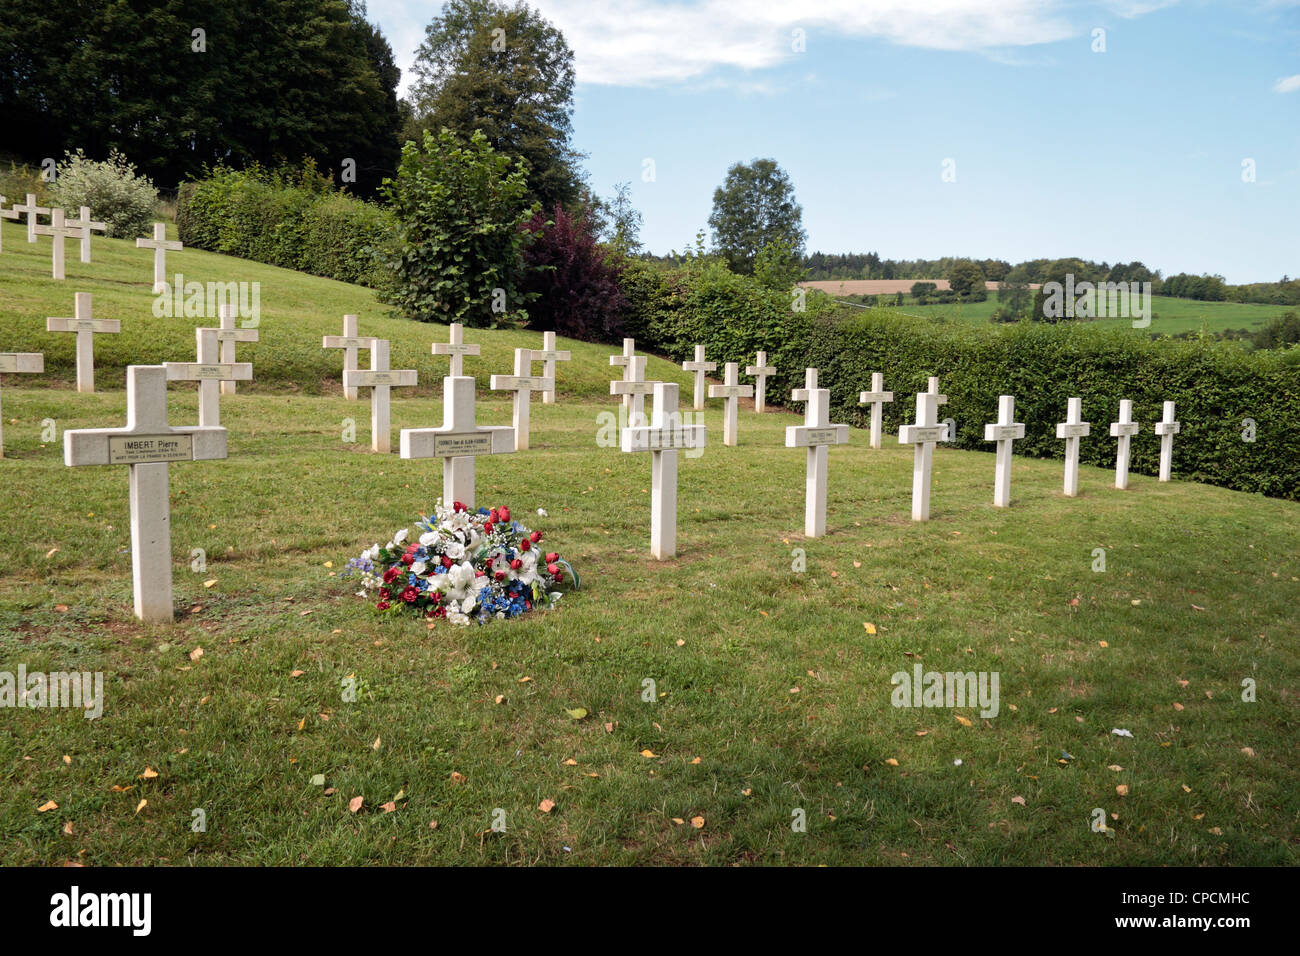 The grave of Alain-Fournier in the French National Cemetery St Remy La Calonne, Les Eparges, Lorraine, France. Stock Photo